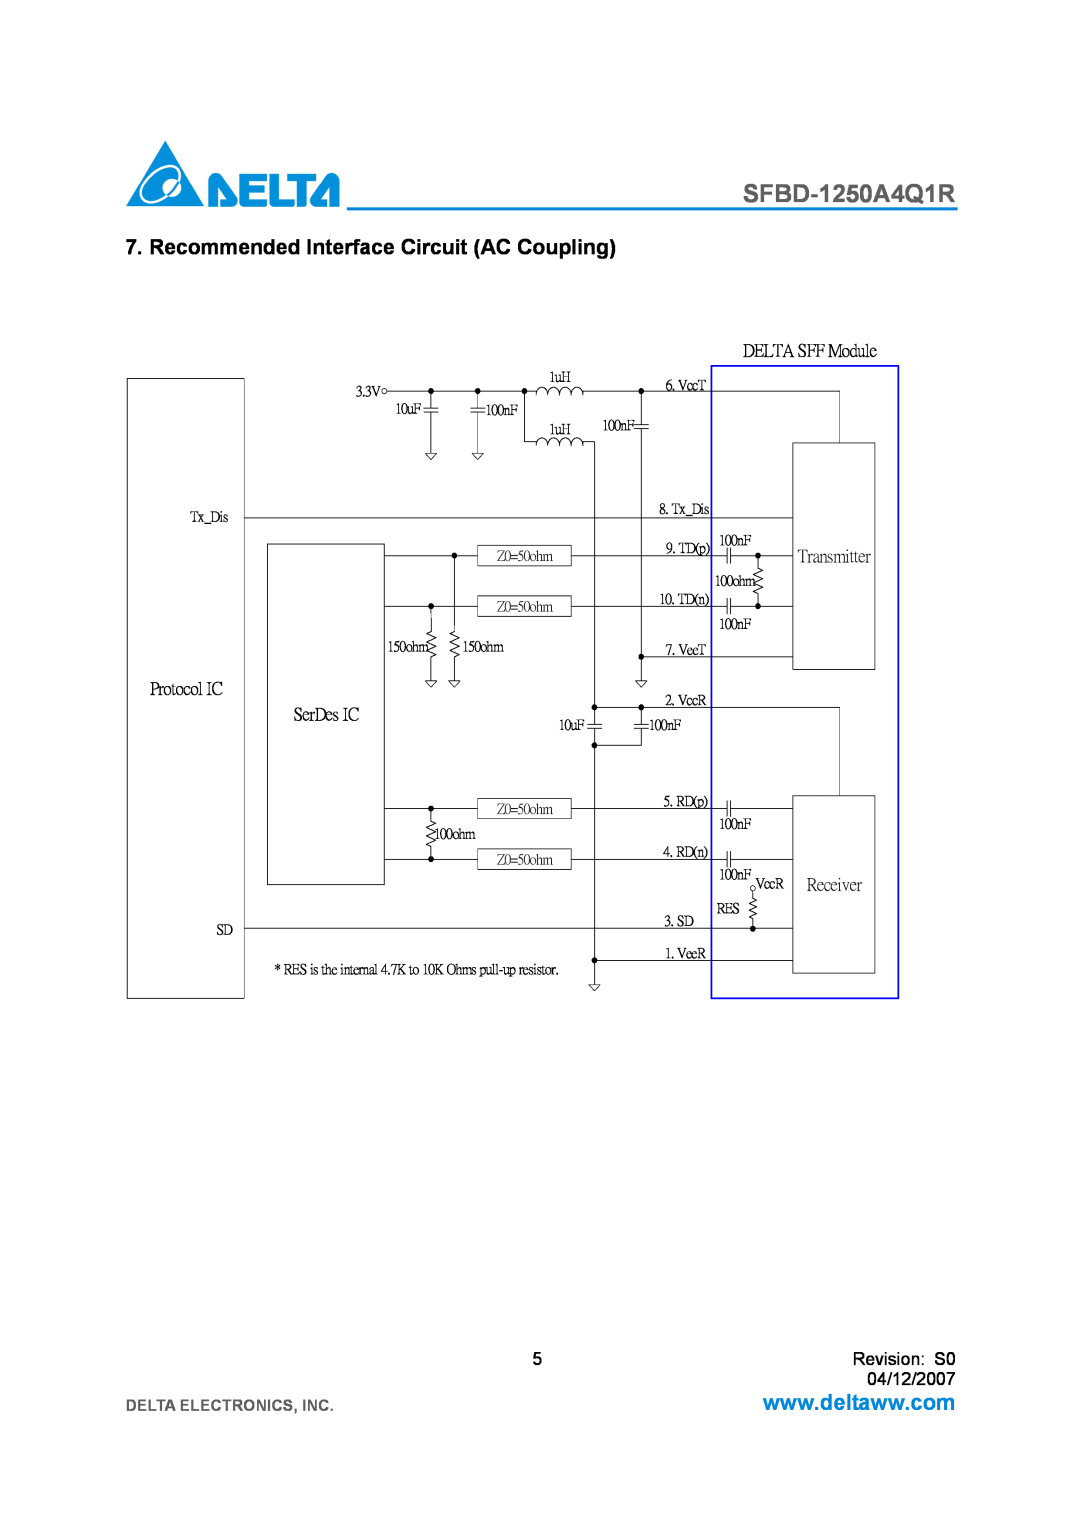 Delta Electronics SFBD-1250A4Q1R manual Recommended Interface Circuit AC Coupling, Delta Electronics, Inc, TxDis, Receiver 